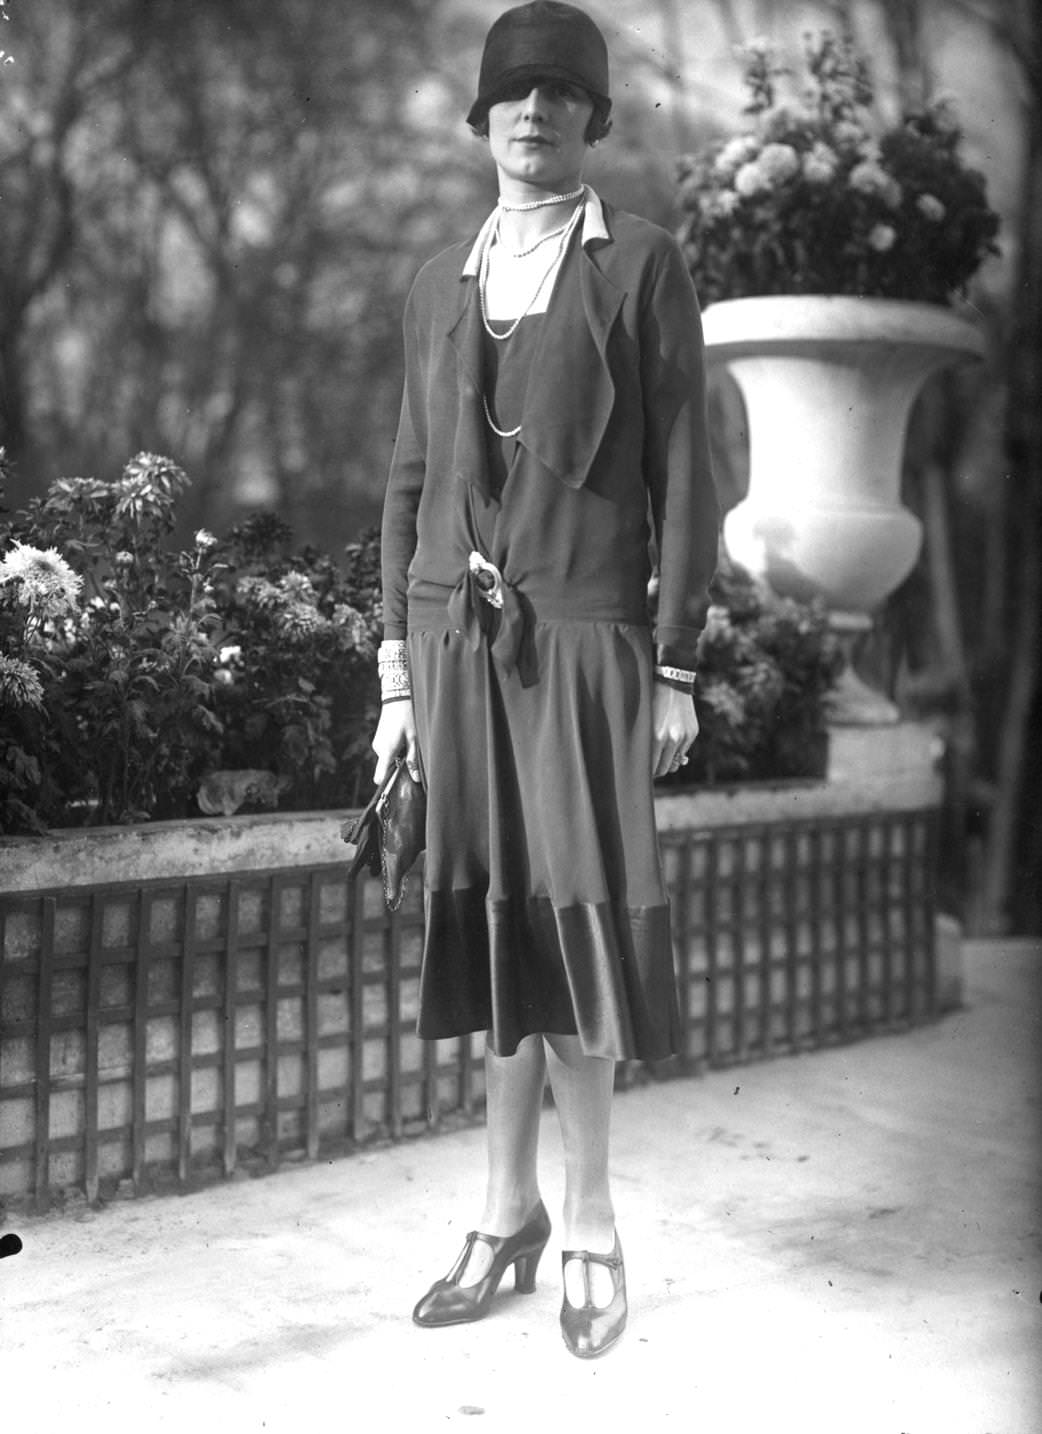 Long waisted dress with a tie on the hips, v-necked with a deep satin edge to the skirt. Accessories are a cloche hat, ropes of beads and several bracelets worn over long sleeves, 1925